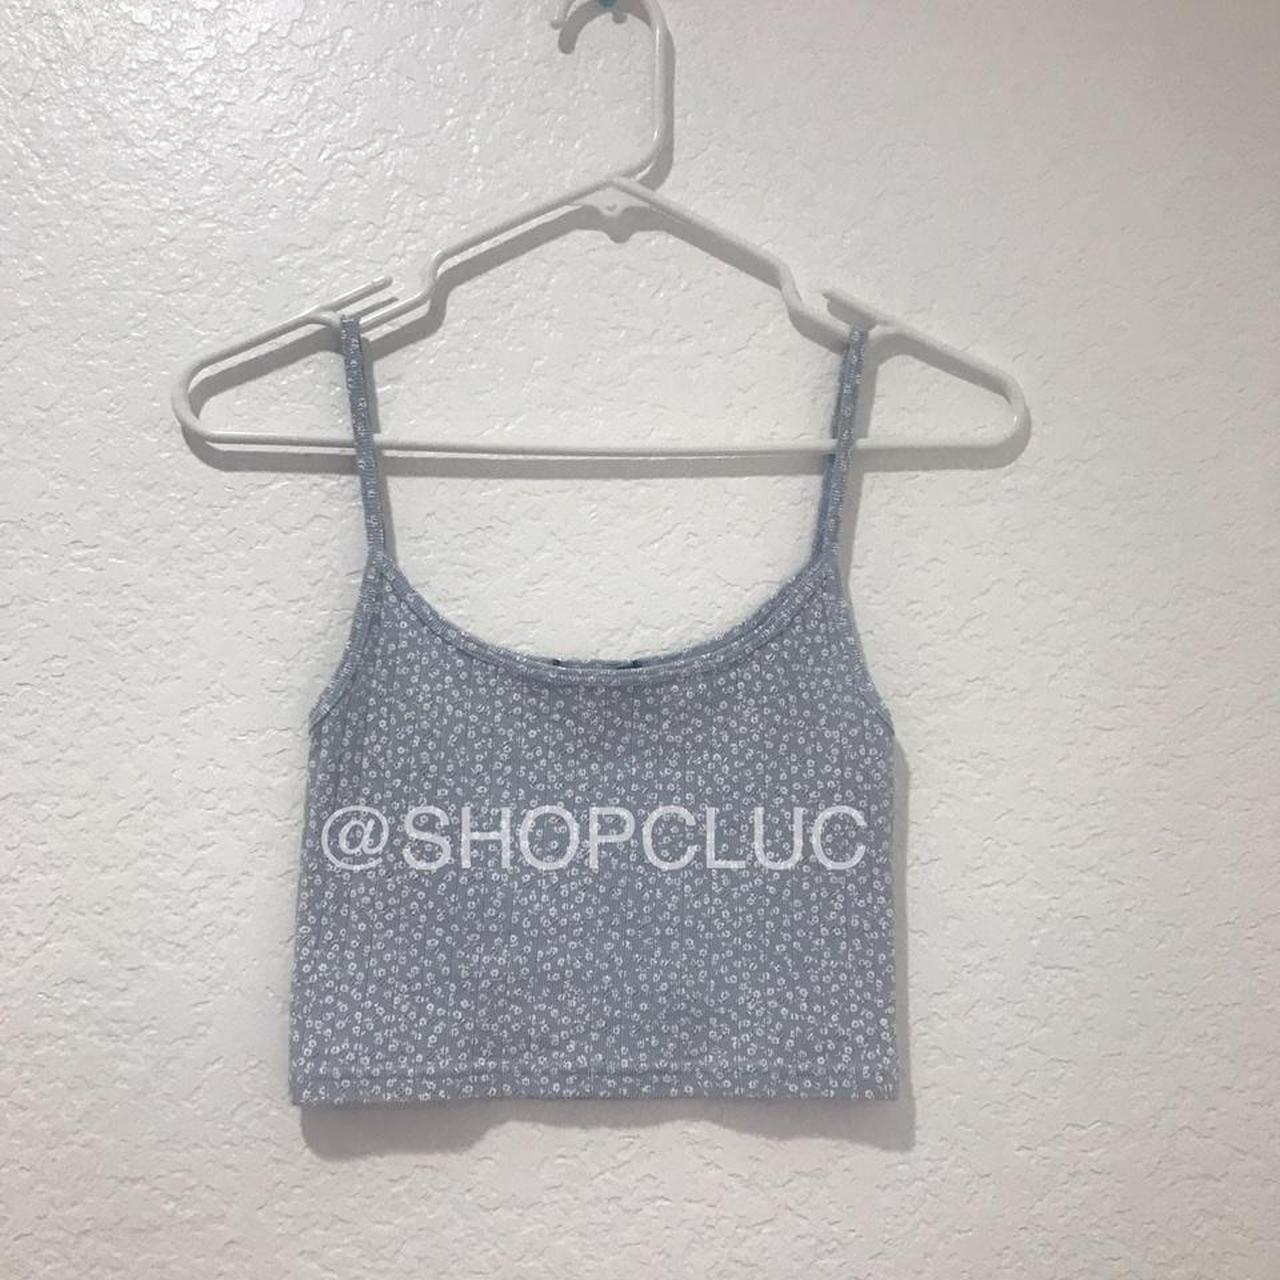 NWOT brand new with tags Brandy Melville Skylar